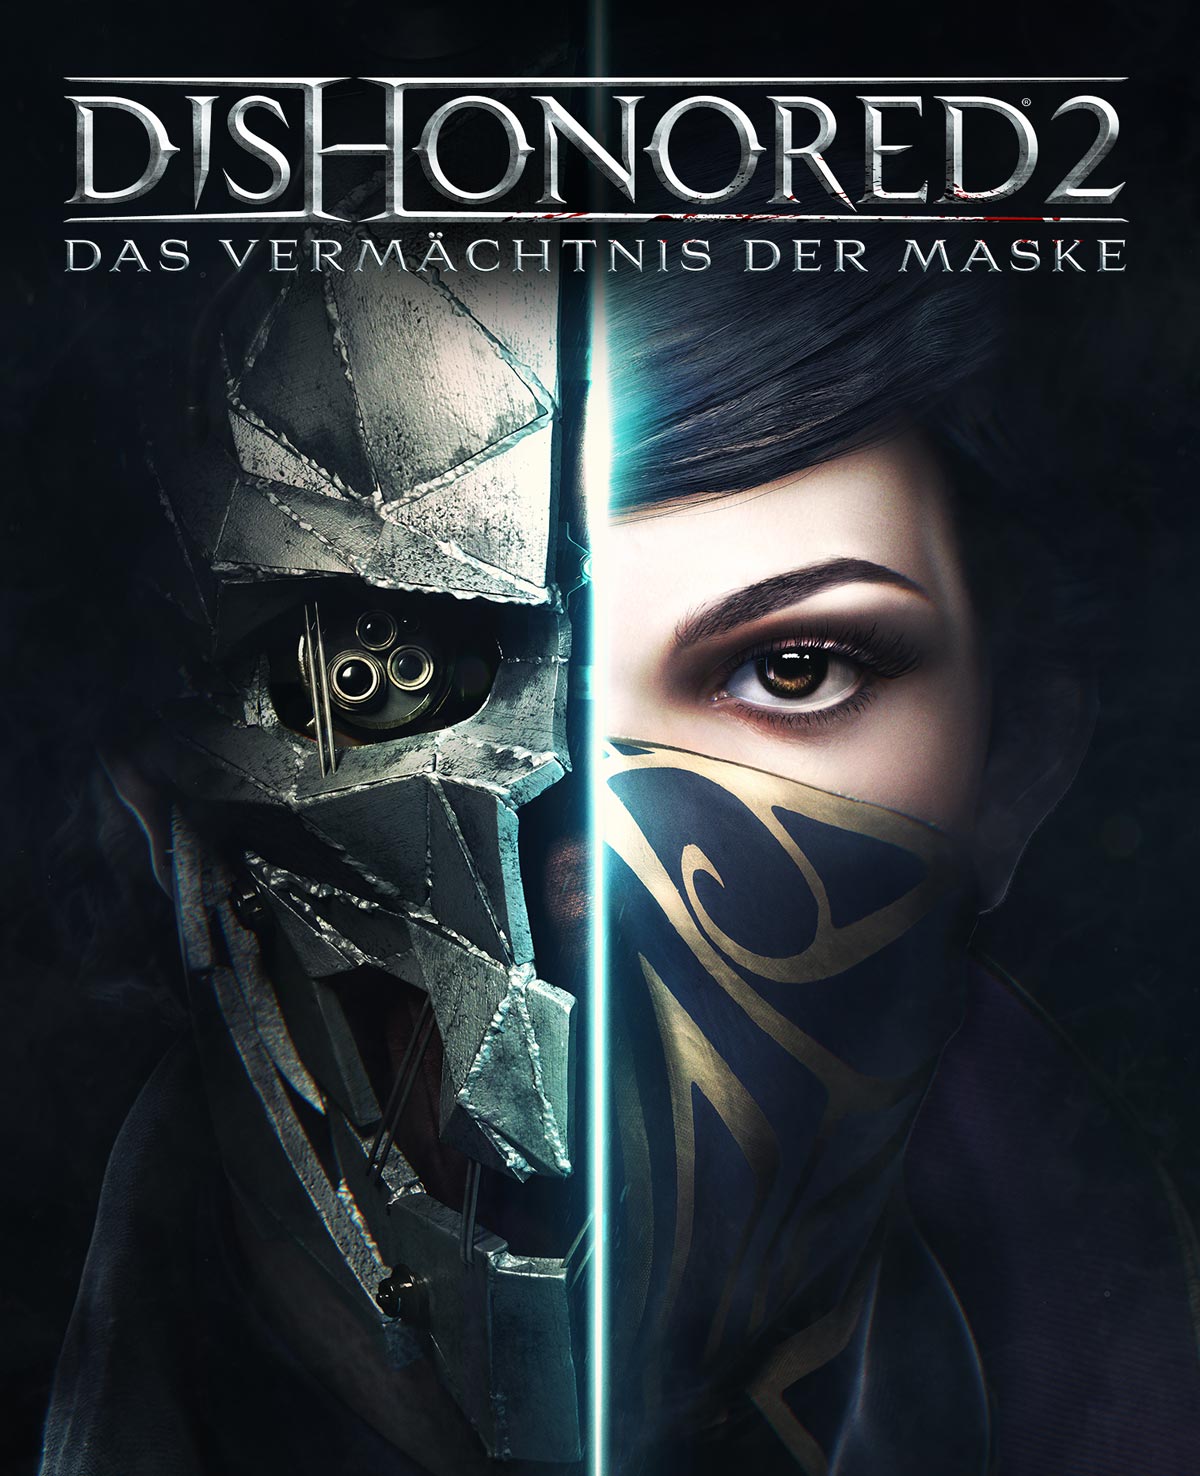 Dishonored 2 demo download free